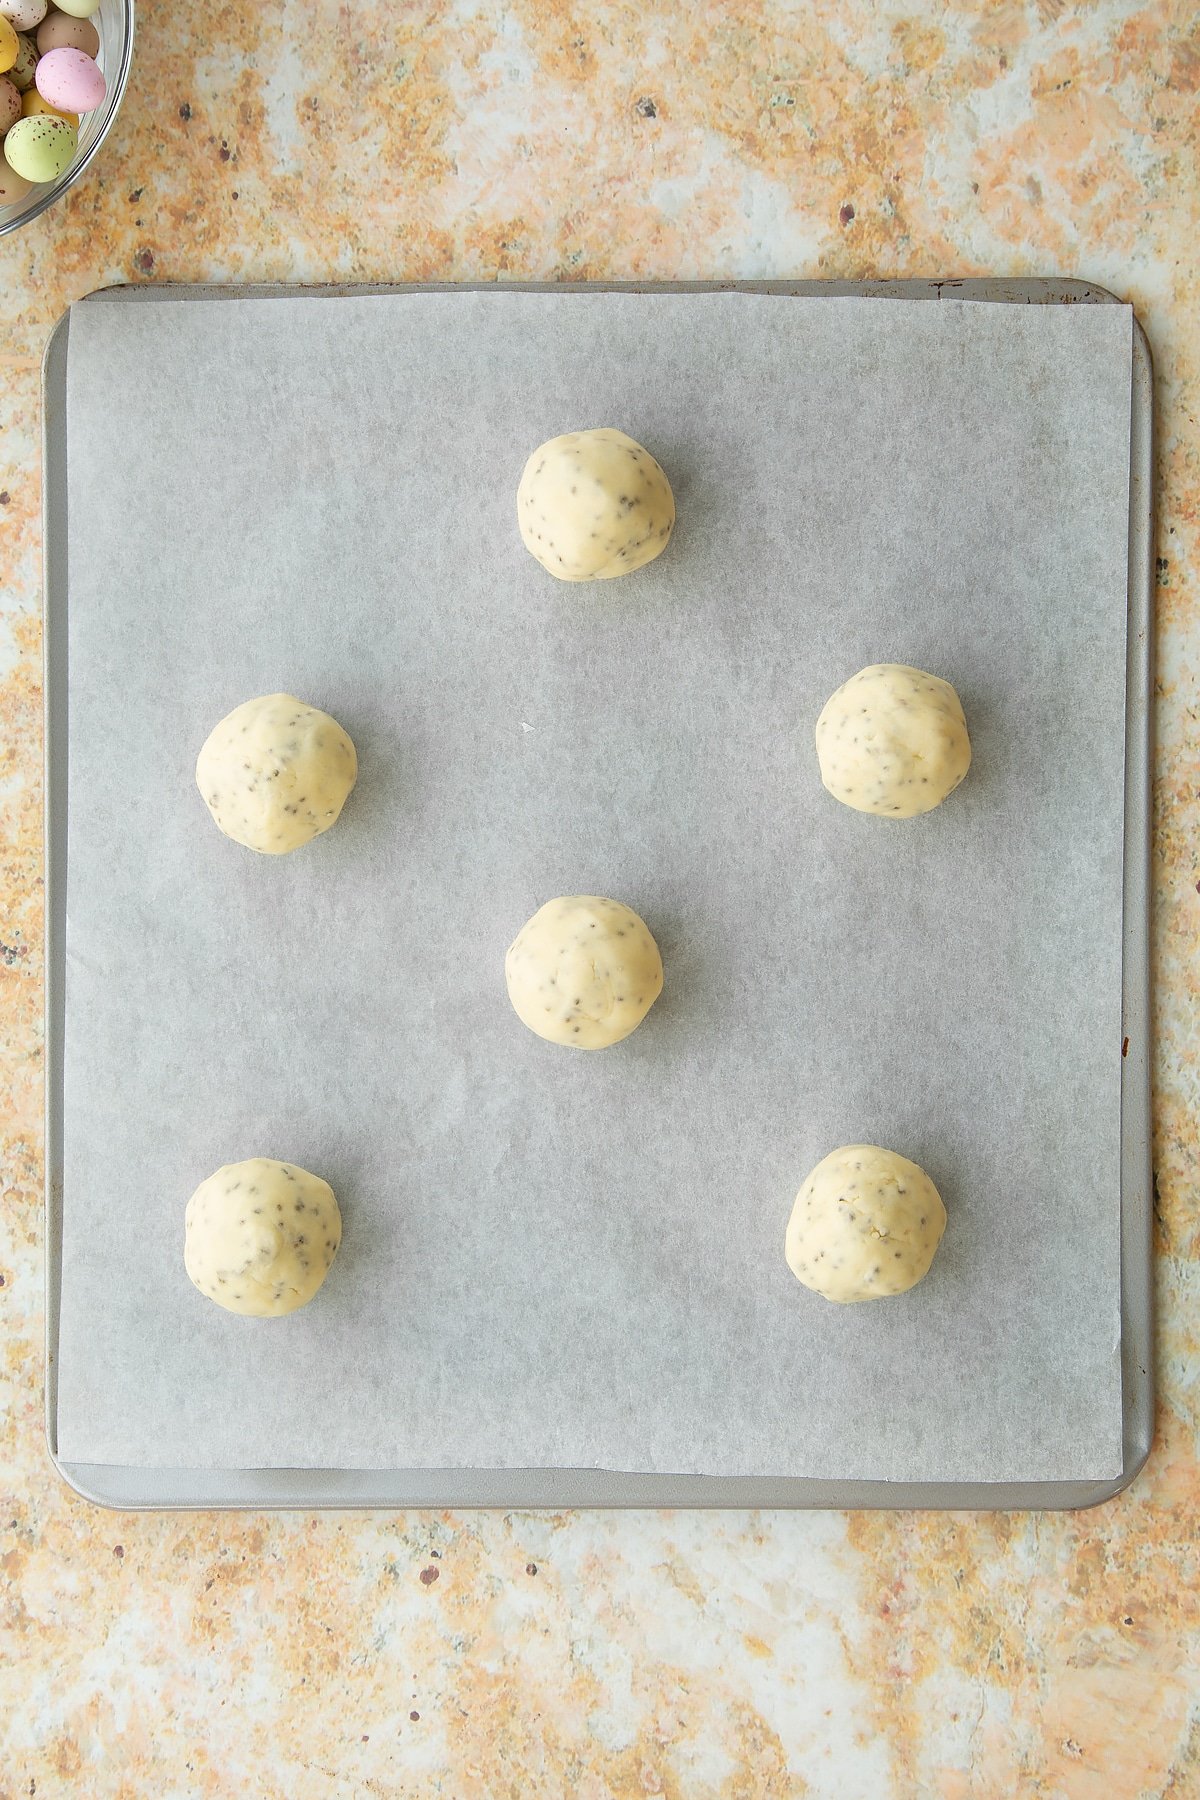 Overhead shot of a baking tray lined with greaseproof paper and small balls of the biscuit mixture added.